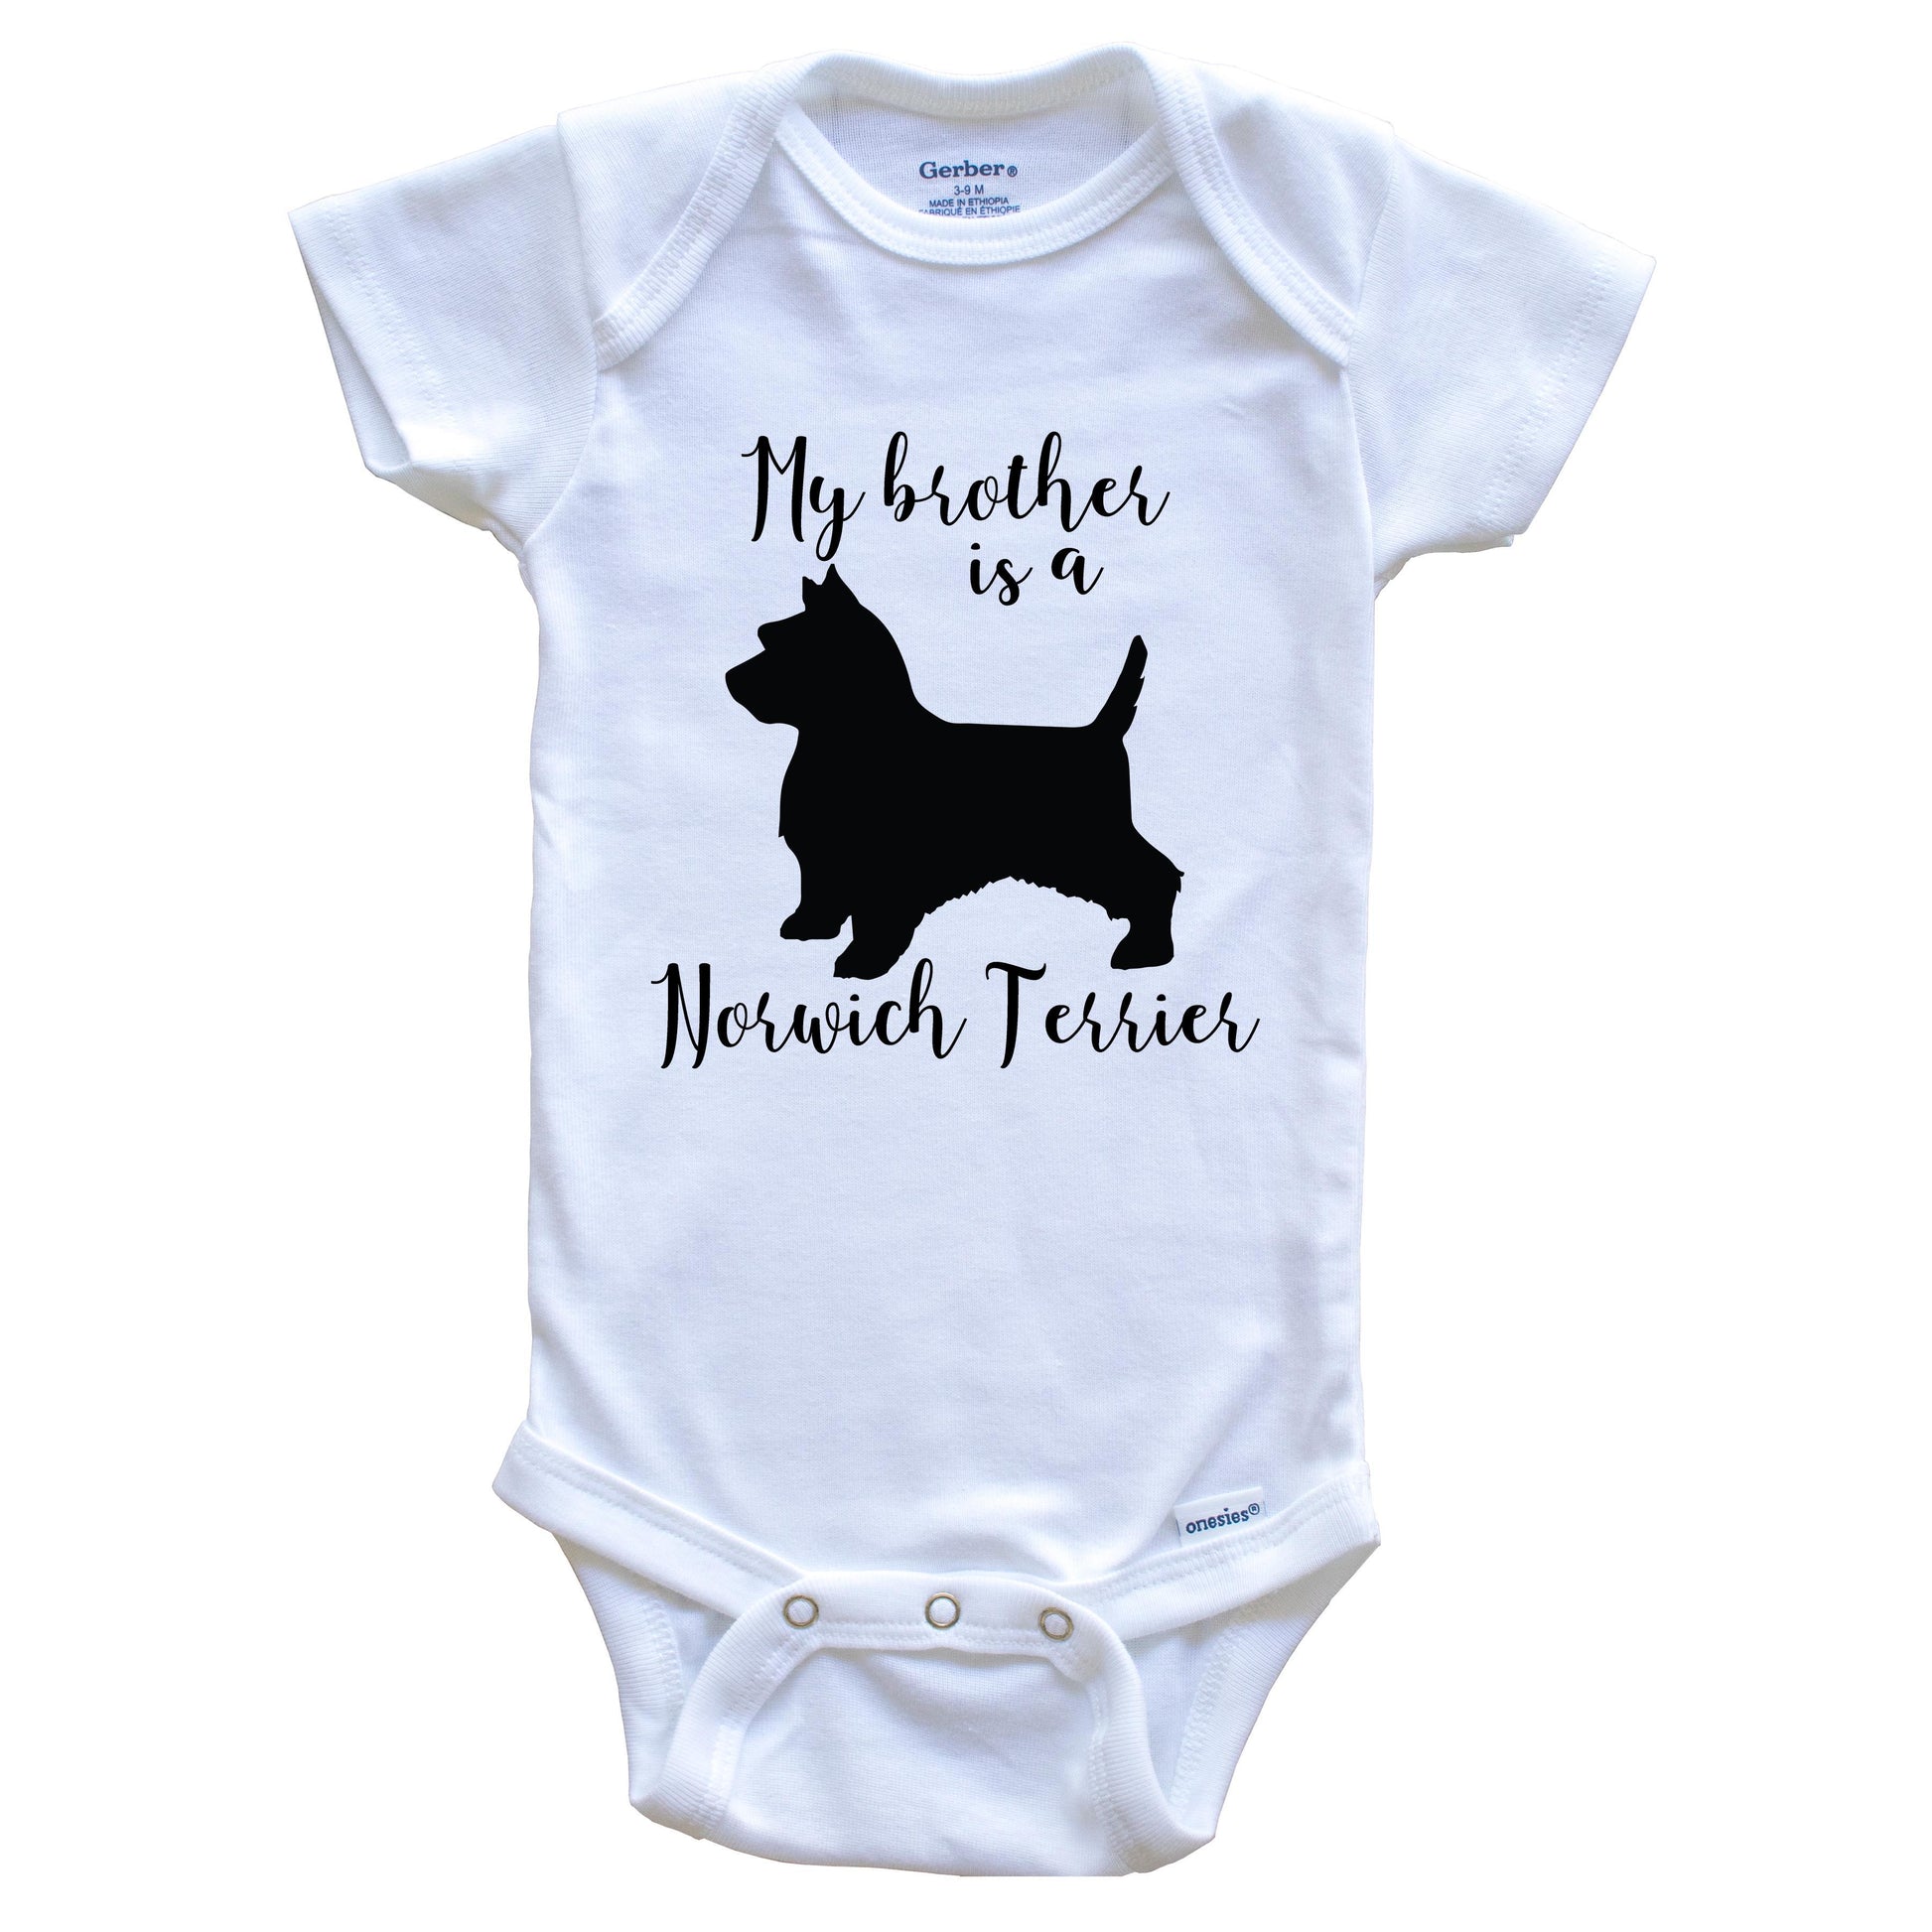 My Brother Is A Norwich Terrier Cute Dog Baby Onesie - Norwich Terrier One Piece Baby Bodysuit